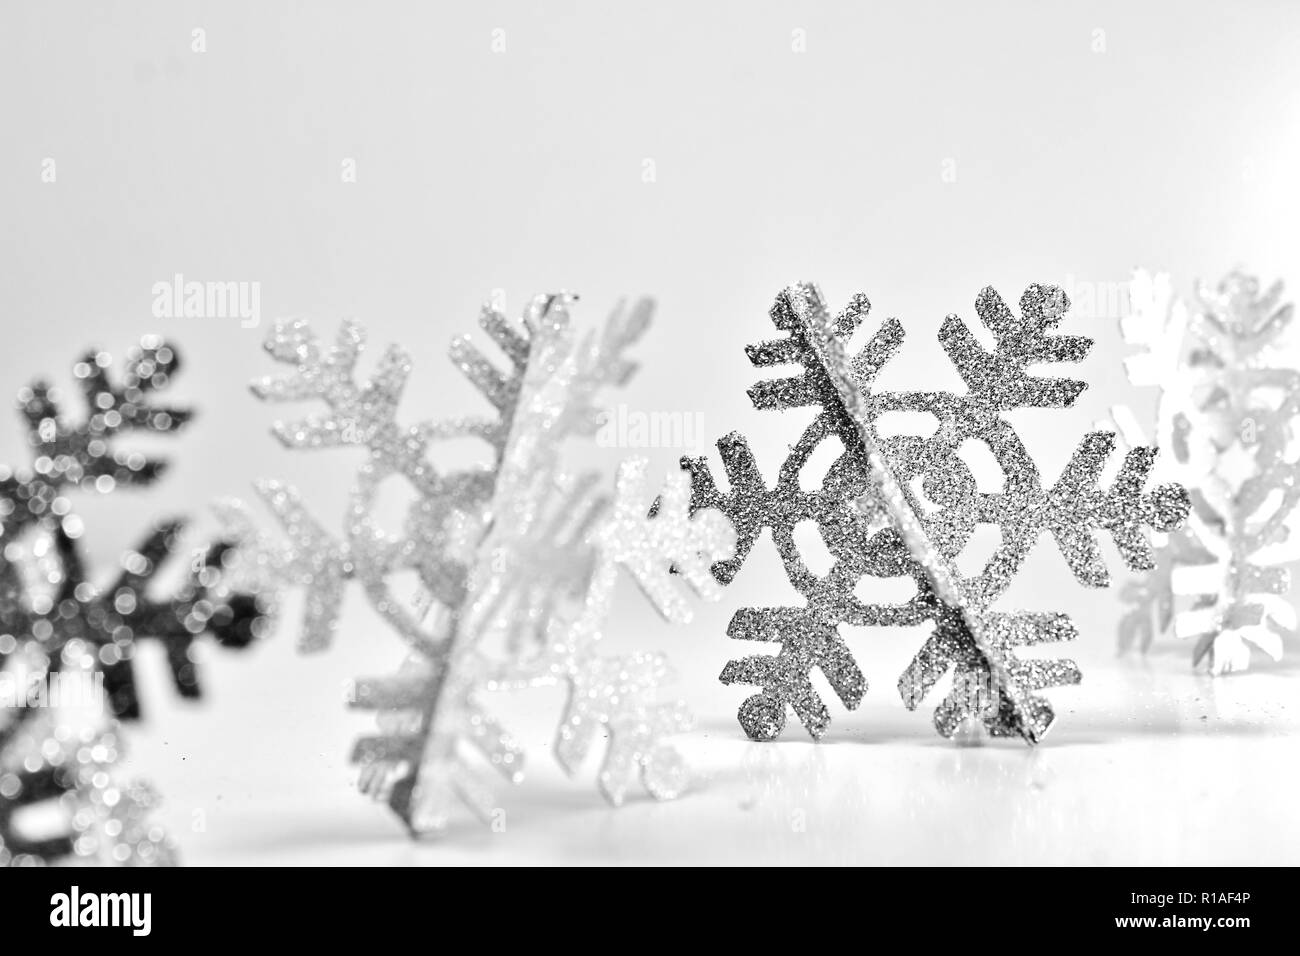 Glittery Snowflakes in a Row with One Silver Snowflake in Focus on White Background. Bright Winter Scene Stock Photo